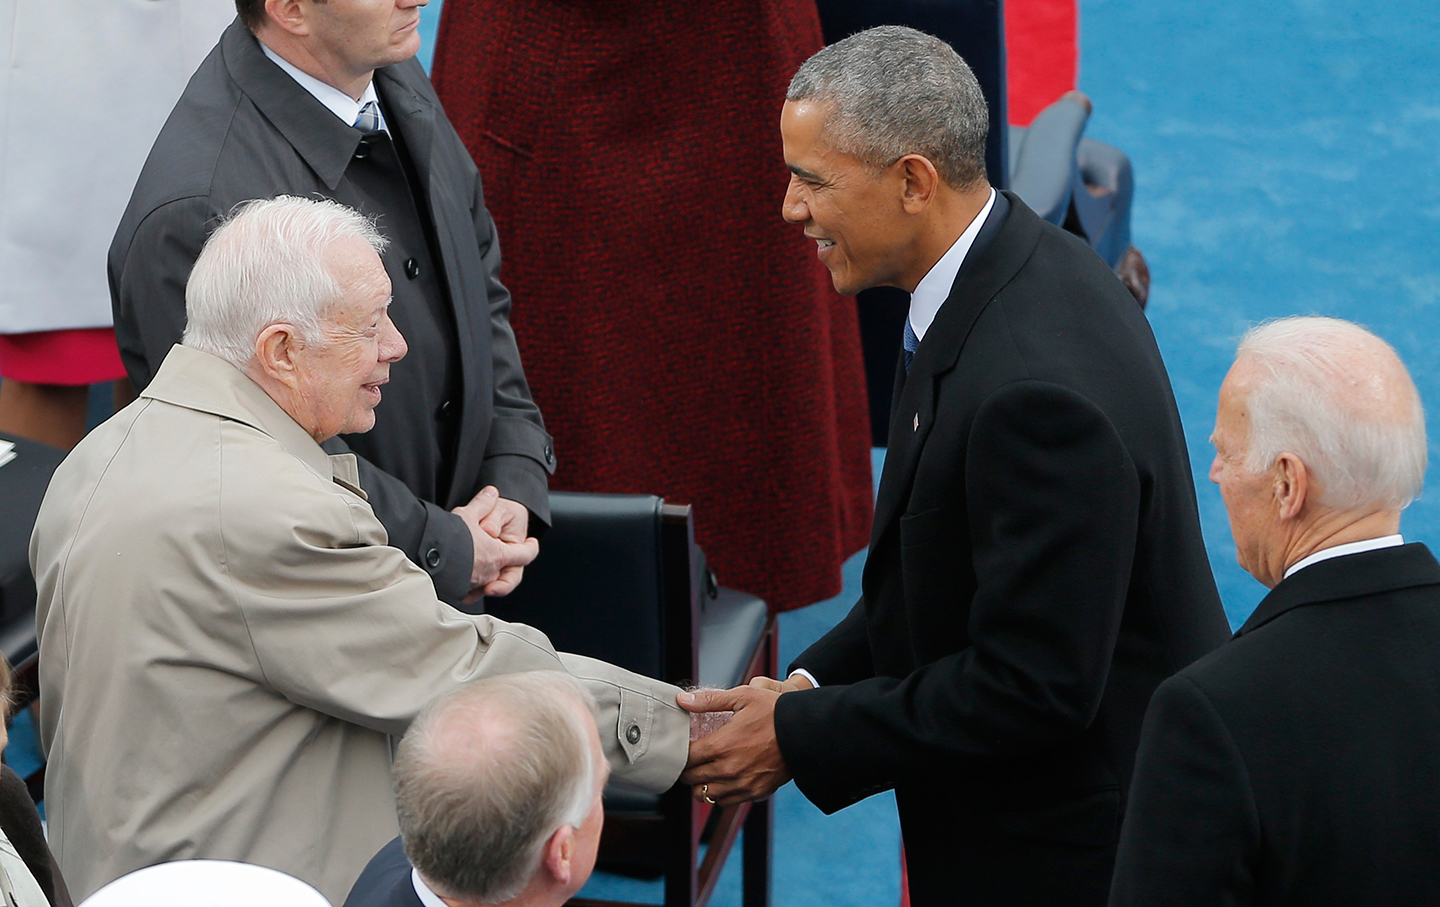 Can Obama Live Up to Carter’s Gold Standard as Ex-President?